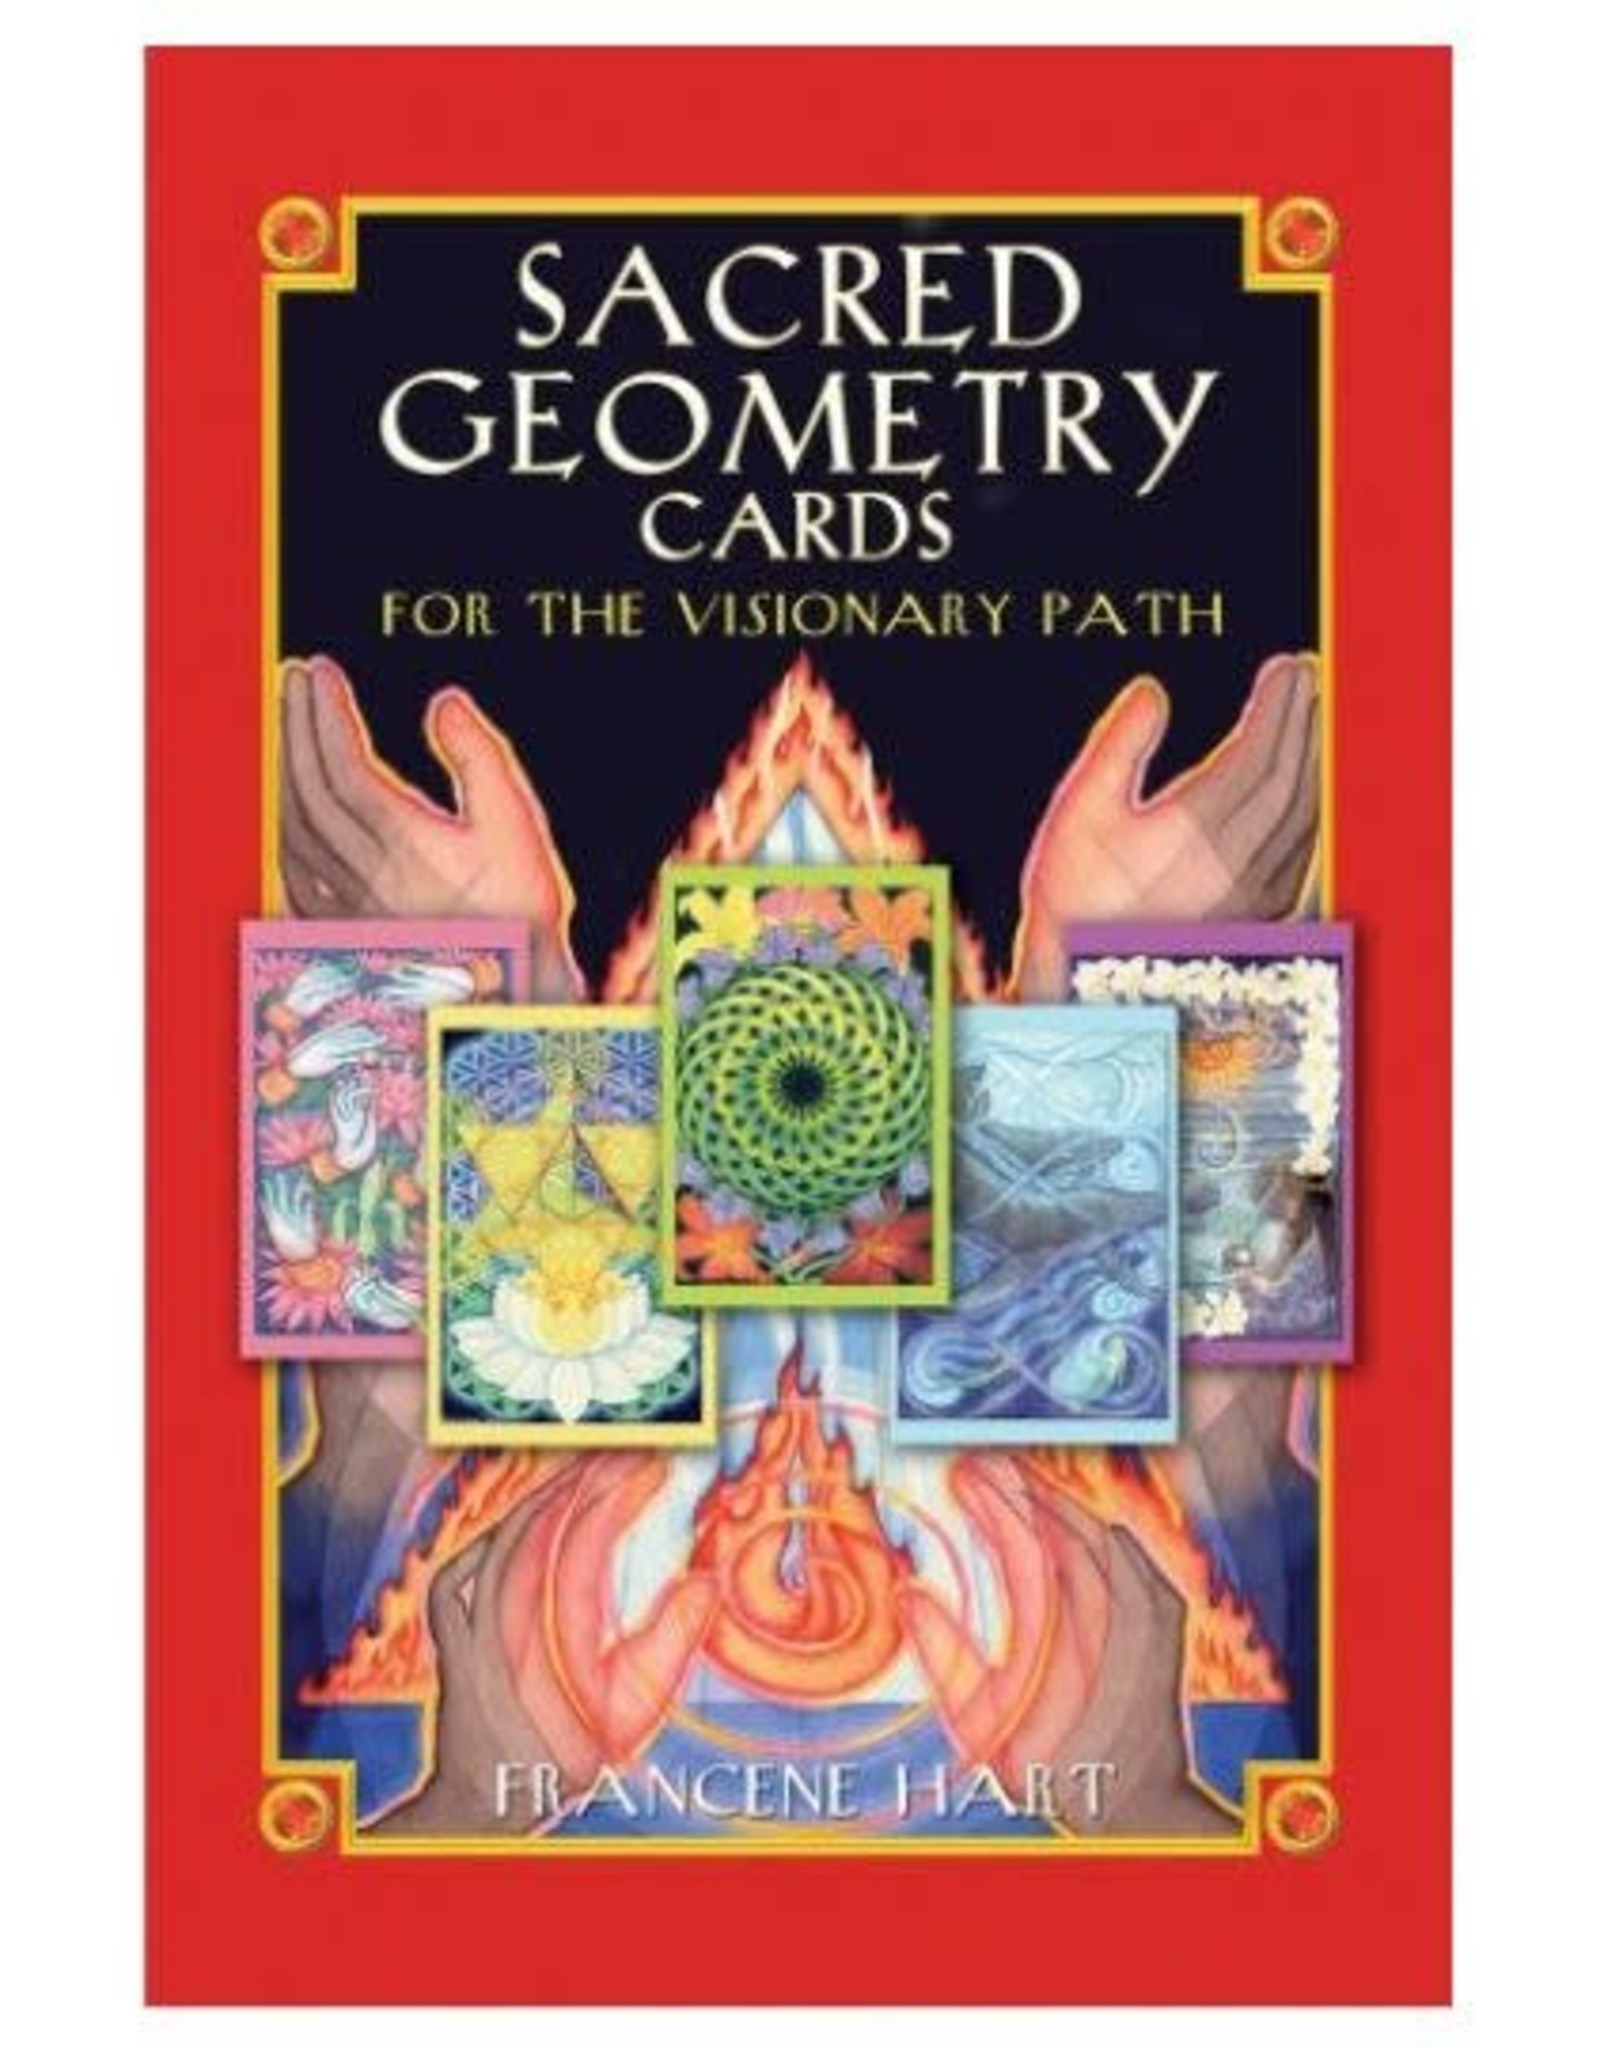 Francene Hart Sacred Geometry Cards for the Visionary Path by Francene Hart